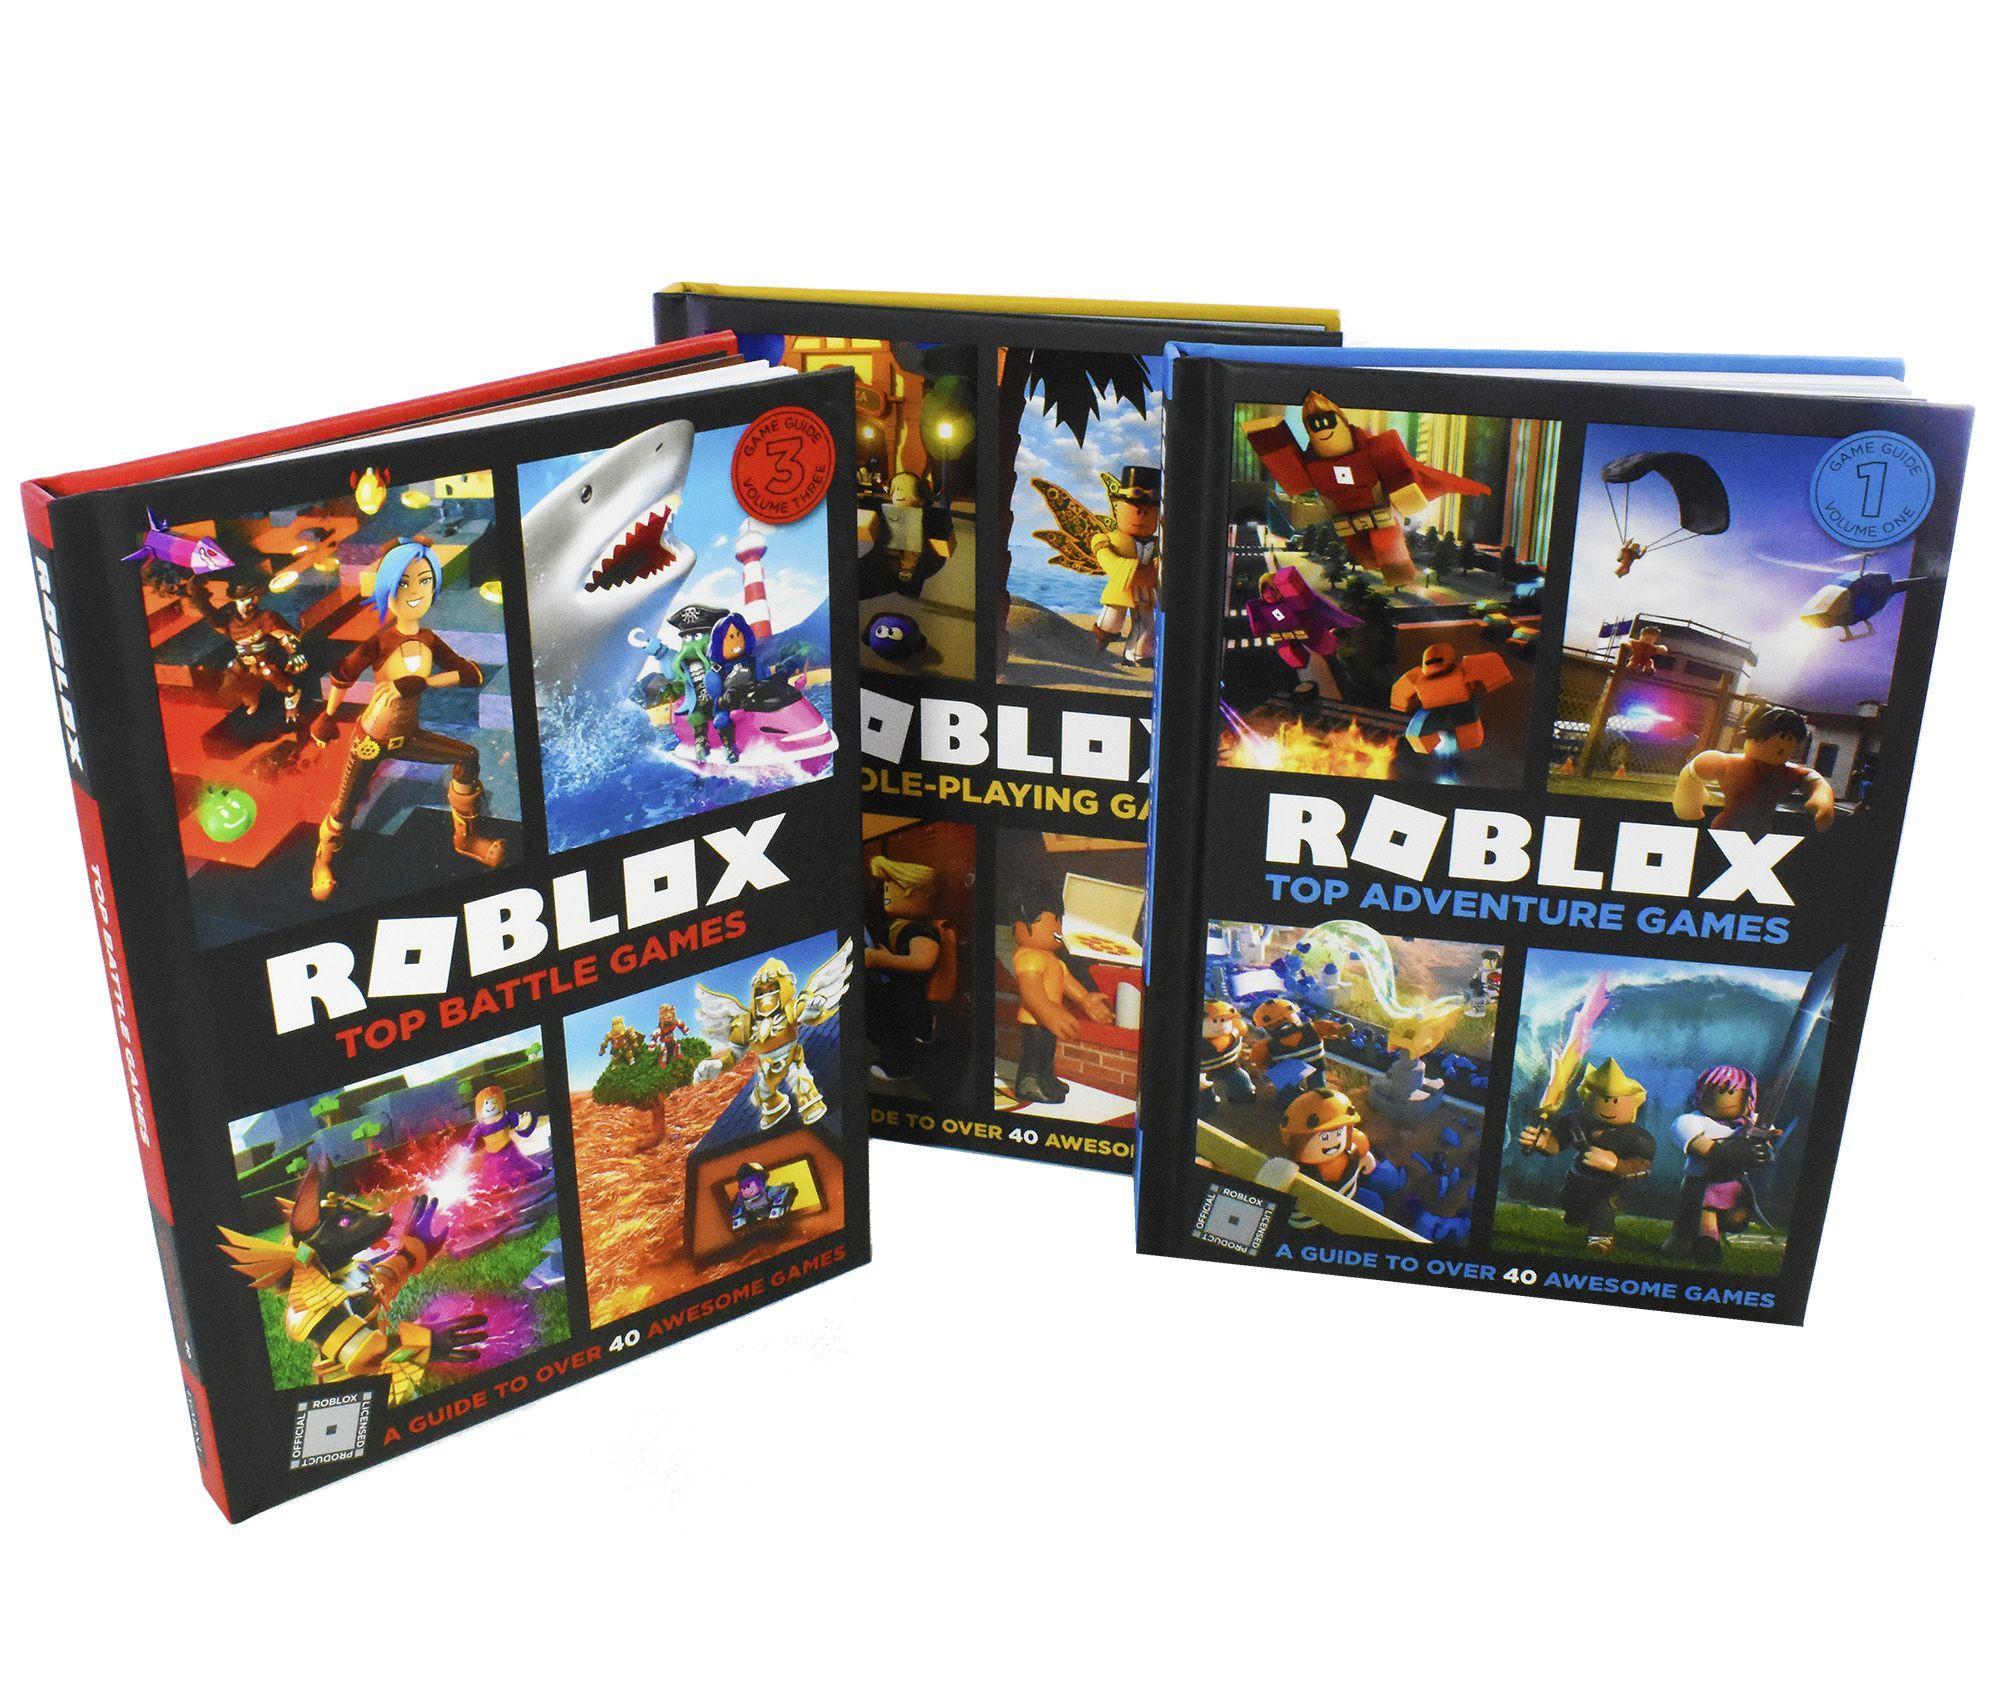 Roblox Ultimate Guide 3 Books Children Collection Hardback By David Jagneaux St Stephens Books - enid roblox